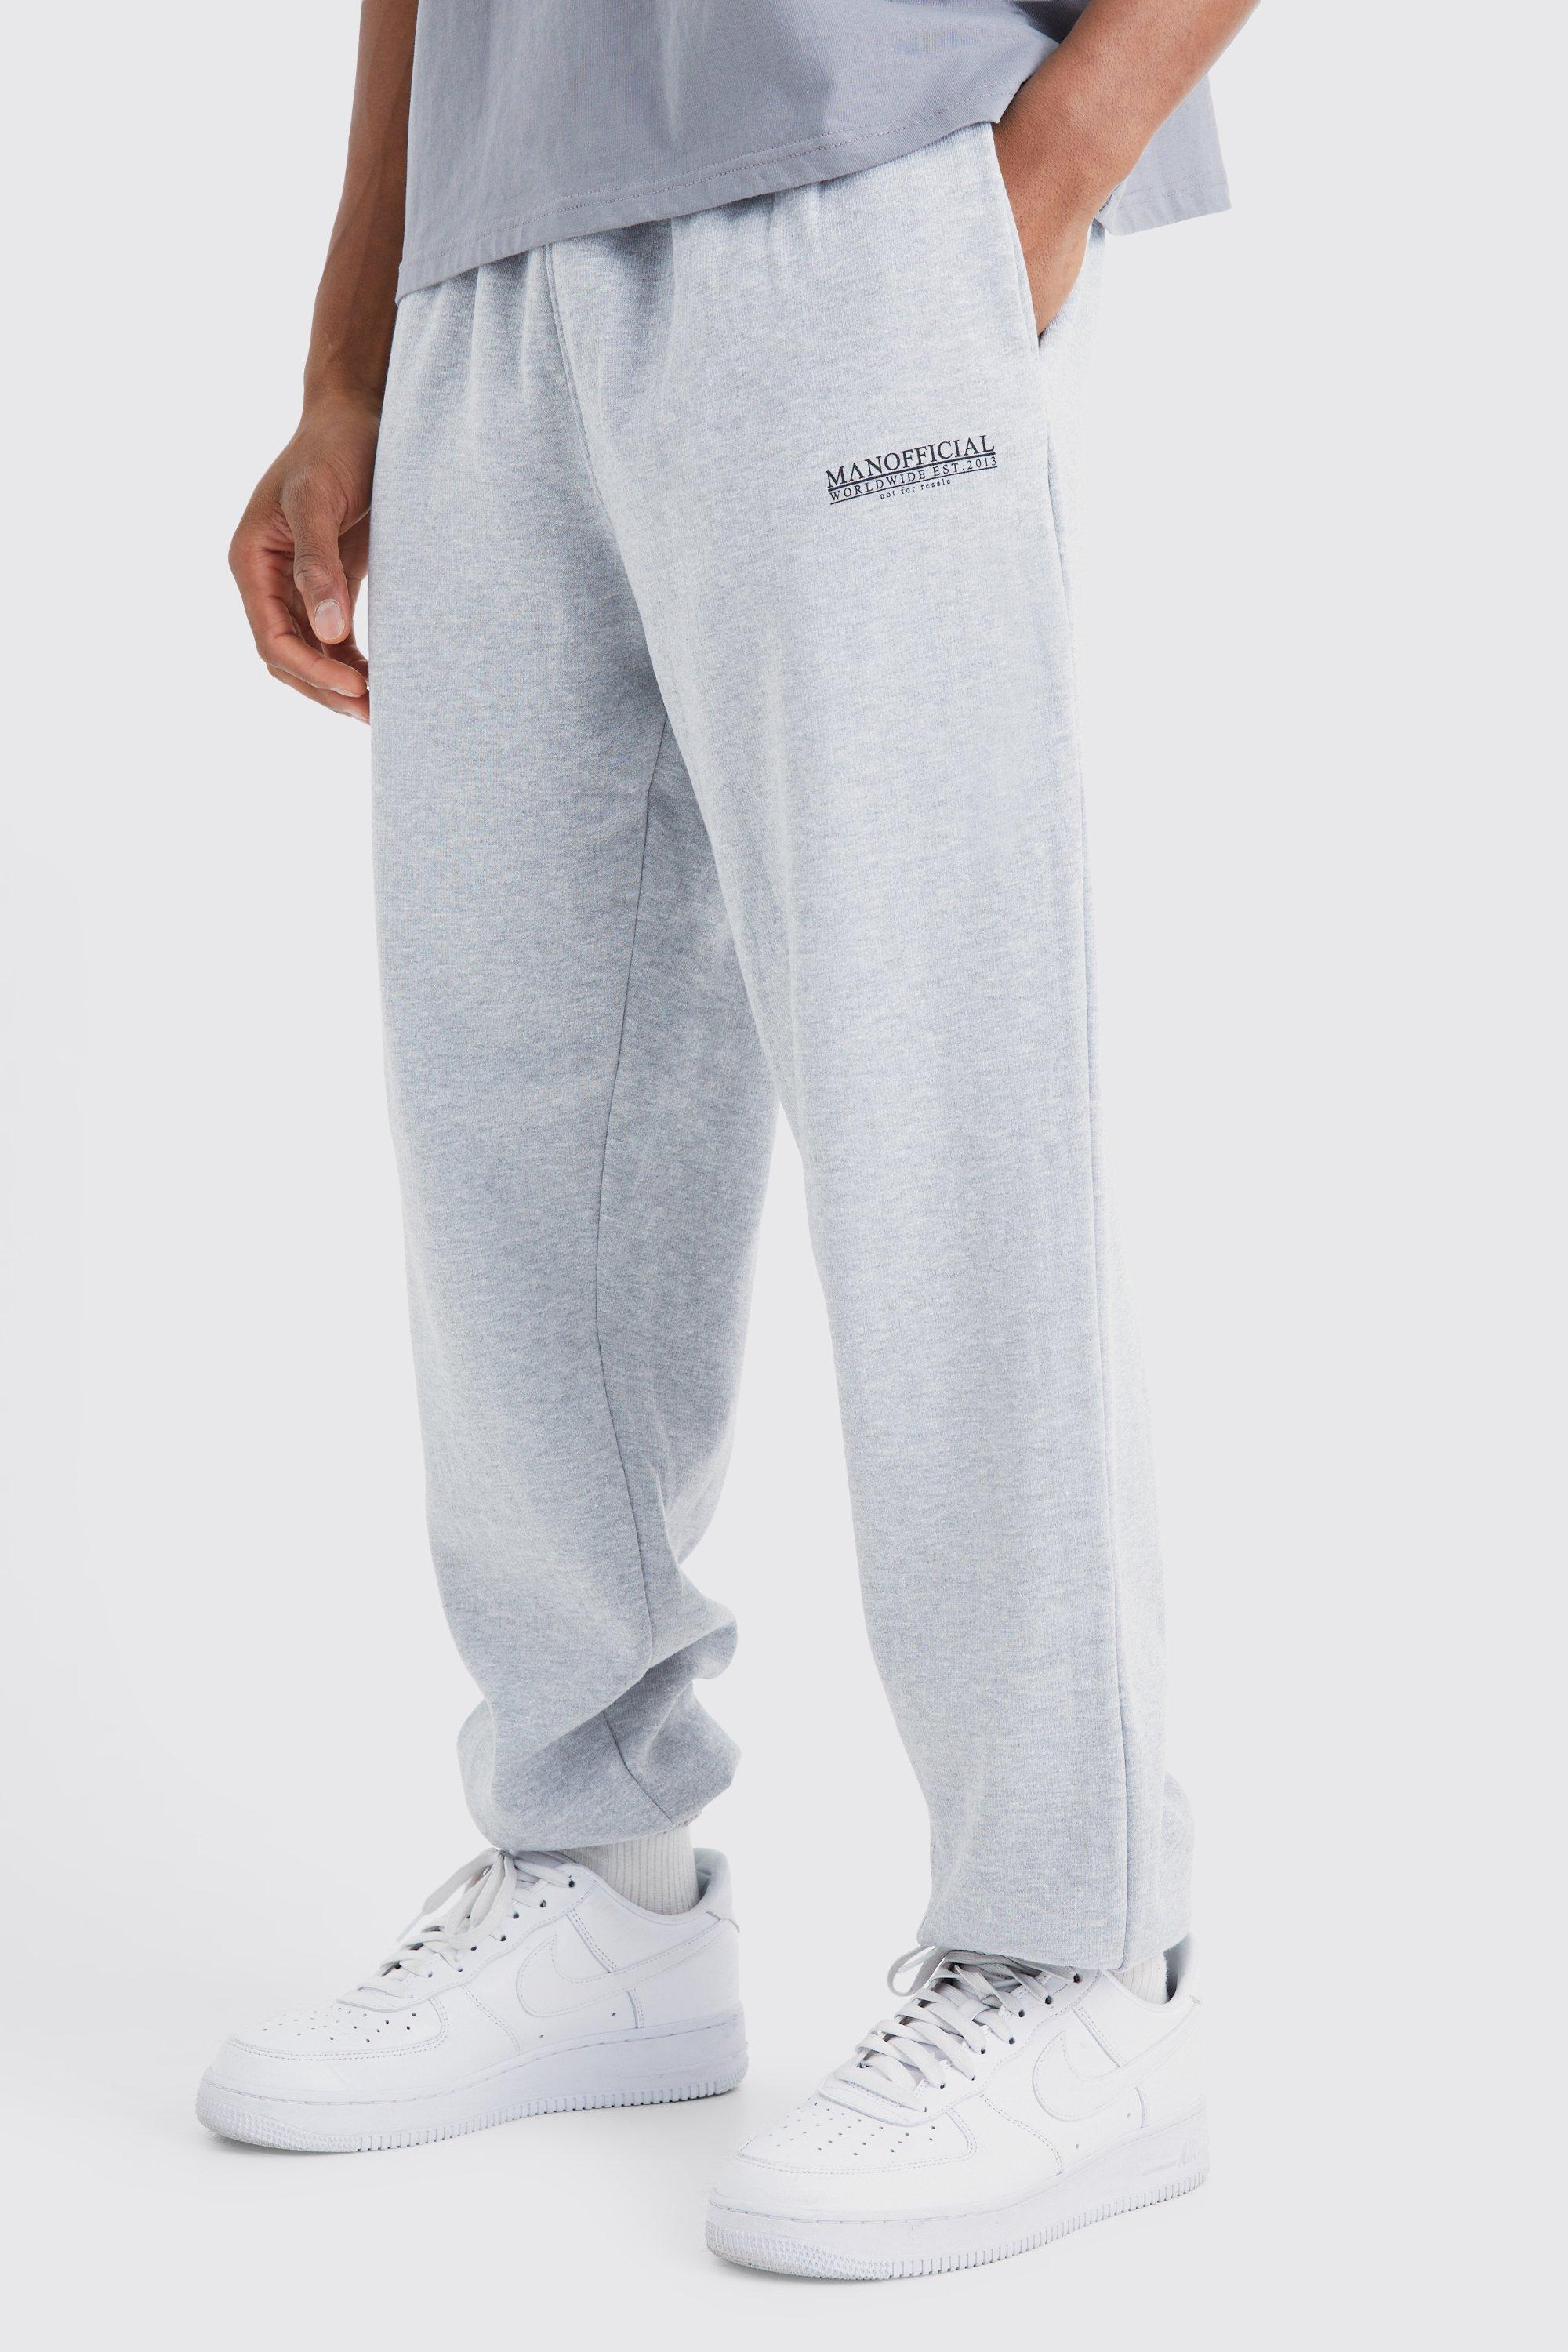 Mens Grey Man Official Worldwide Oversized Joggers, Grey